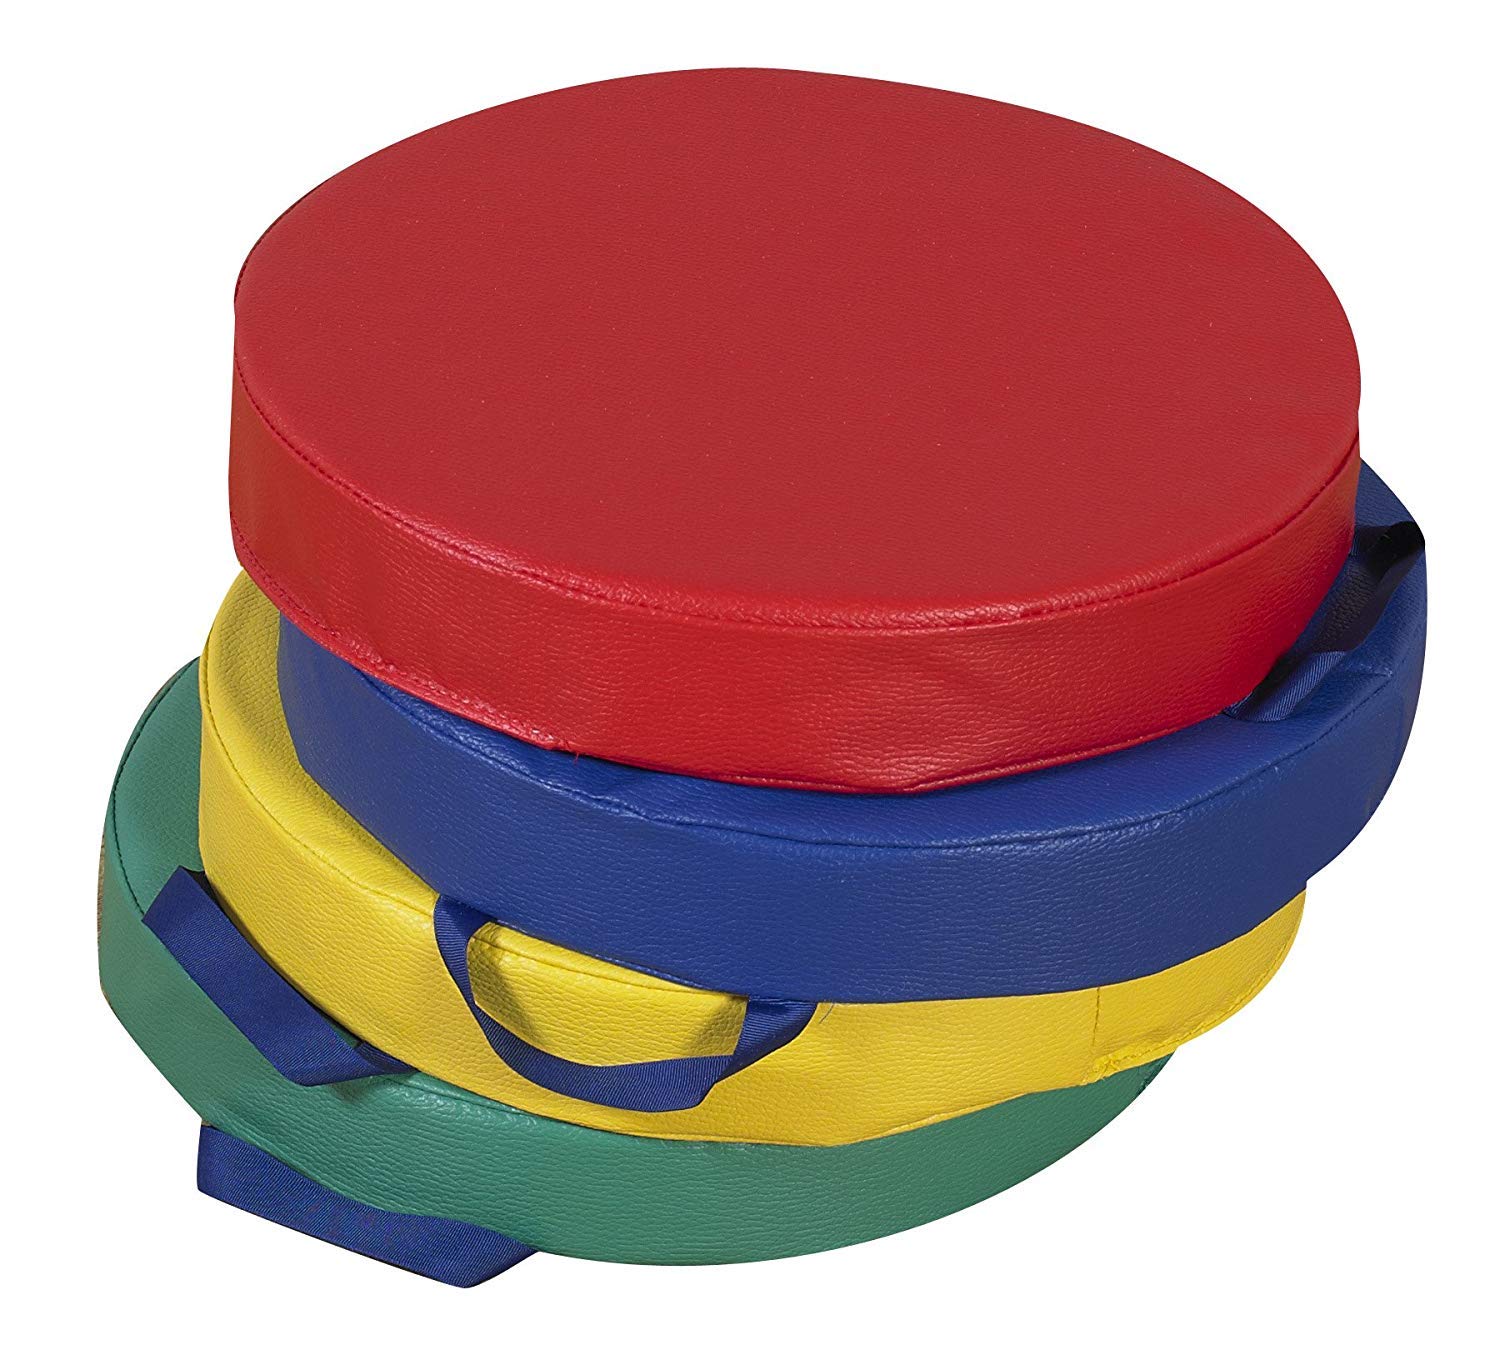 Children's Factory childrens Factory Round Floor cushions - Primary Set of 4